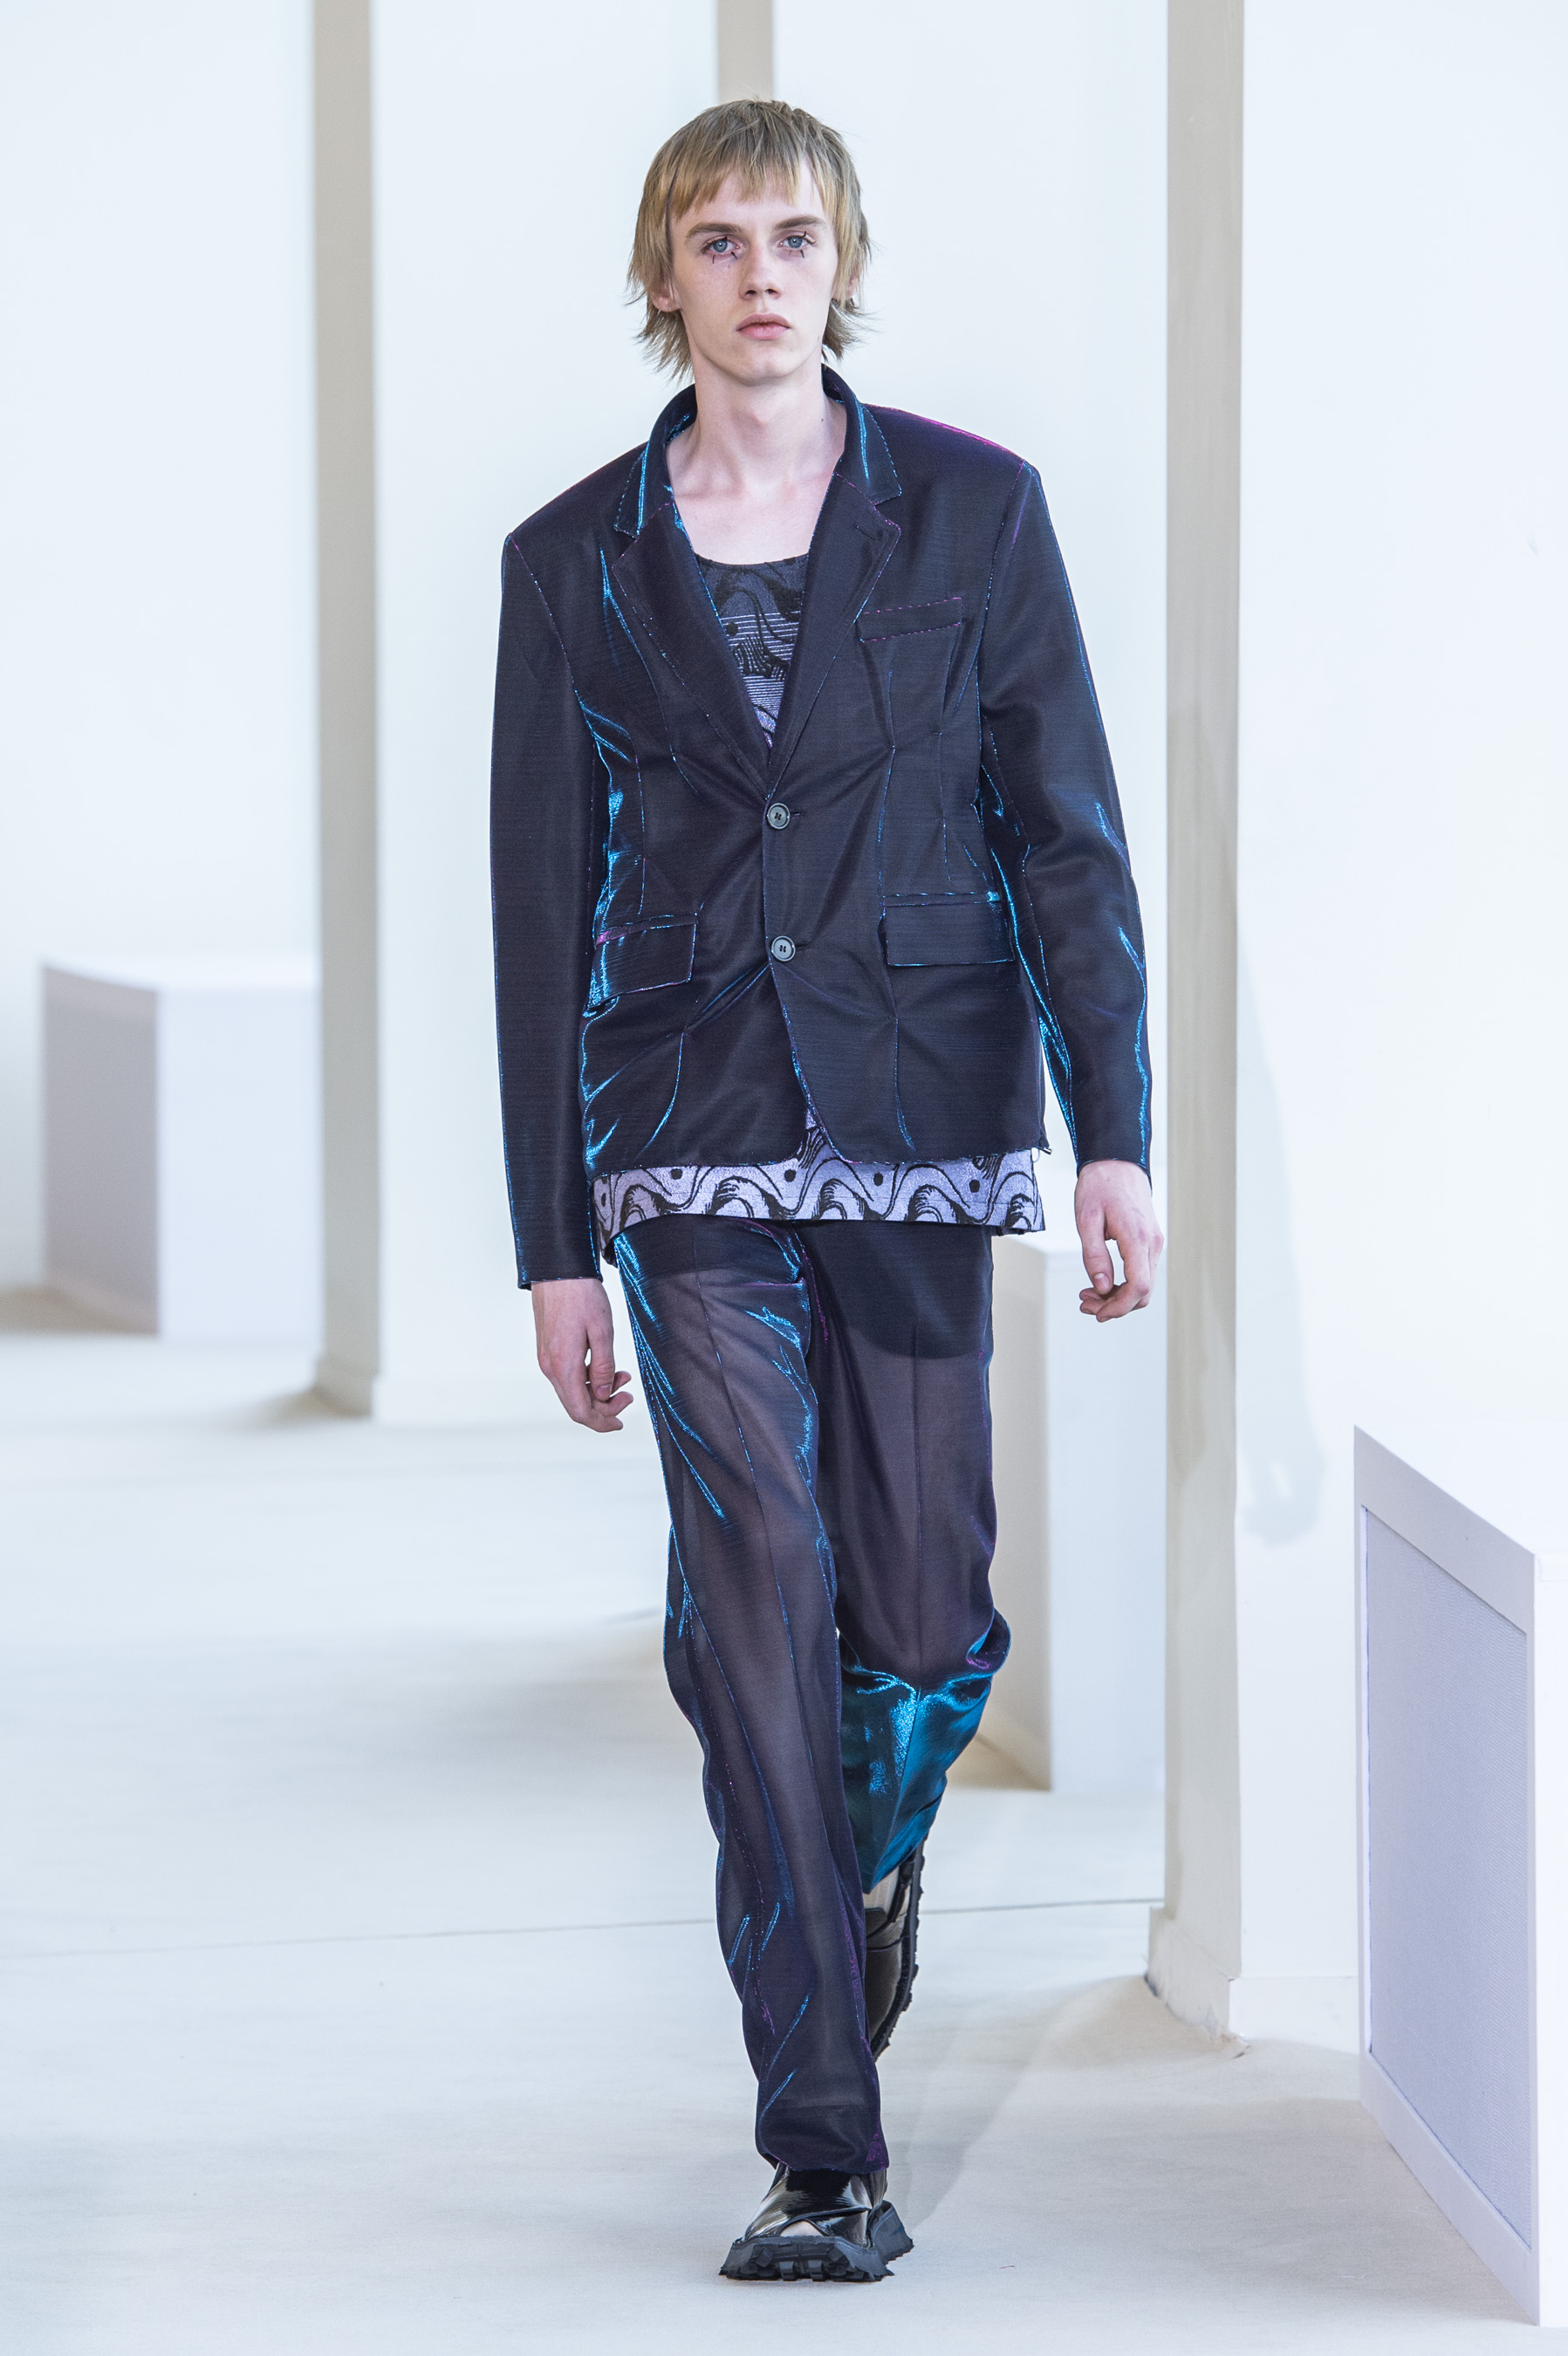 Spring 2020 Menswear trends – STYLE MANAGEMENT EXPERIENCE